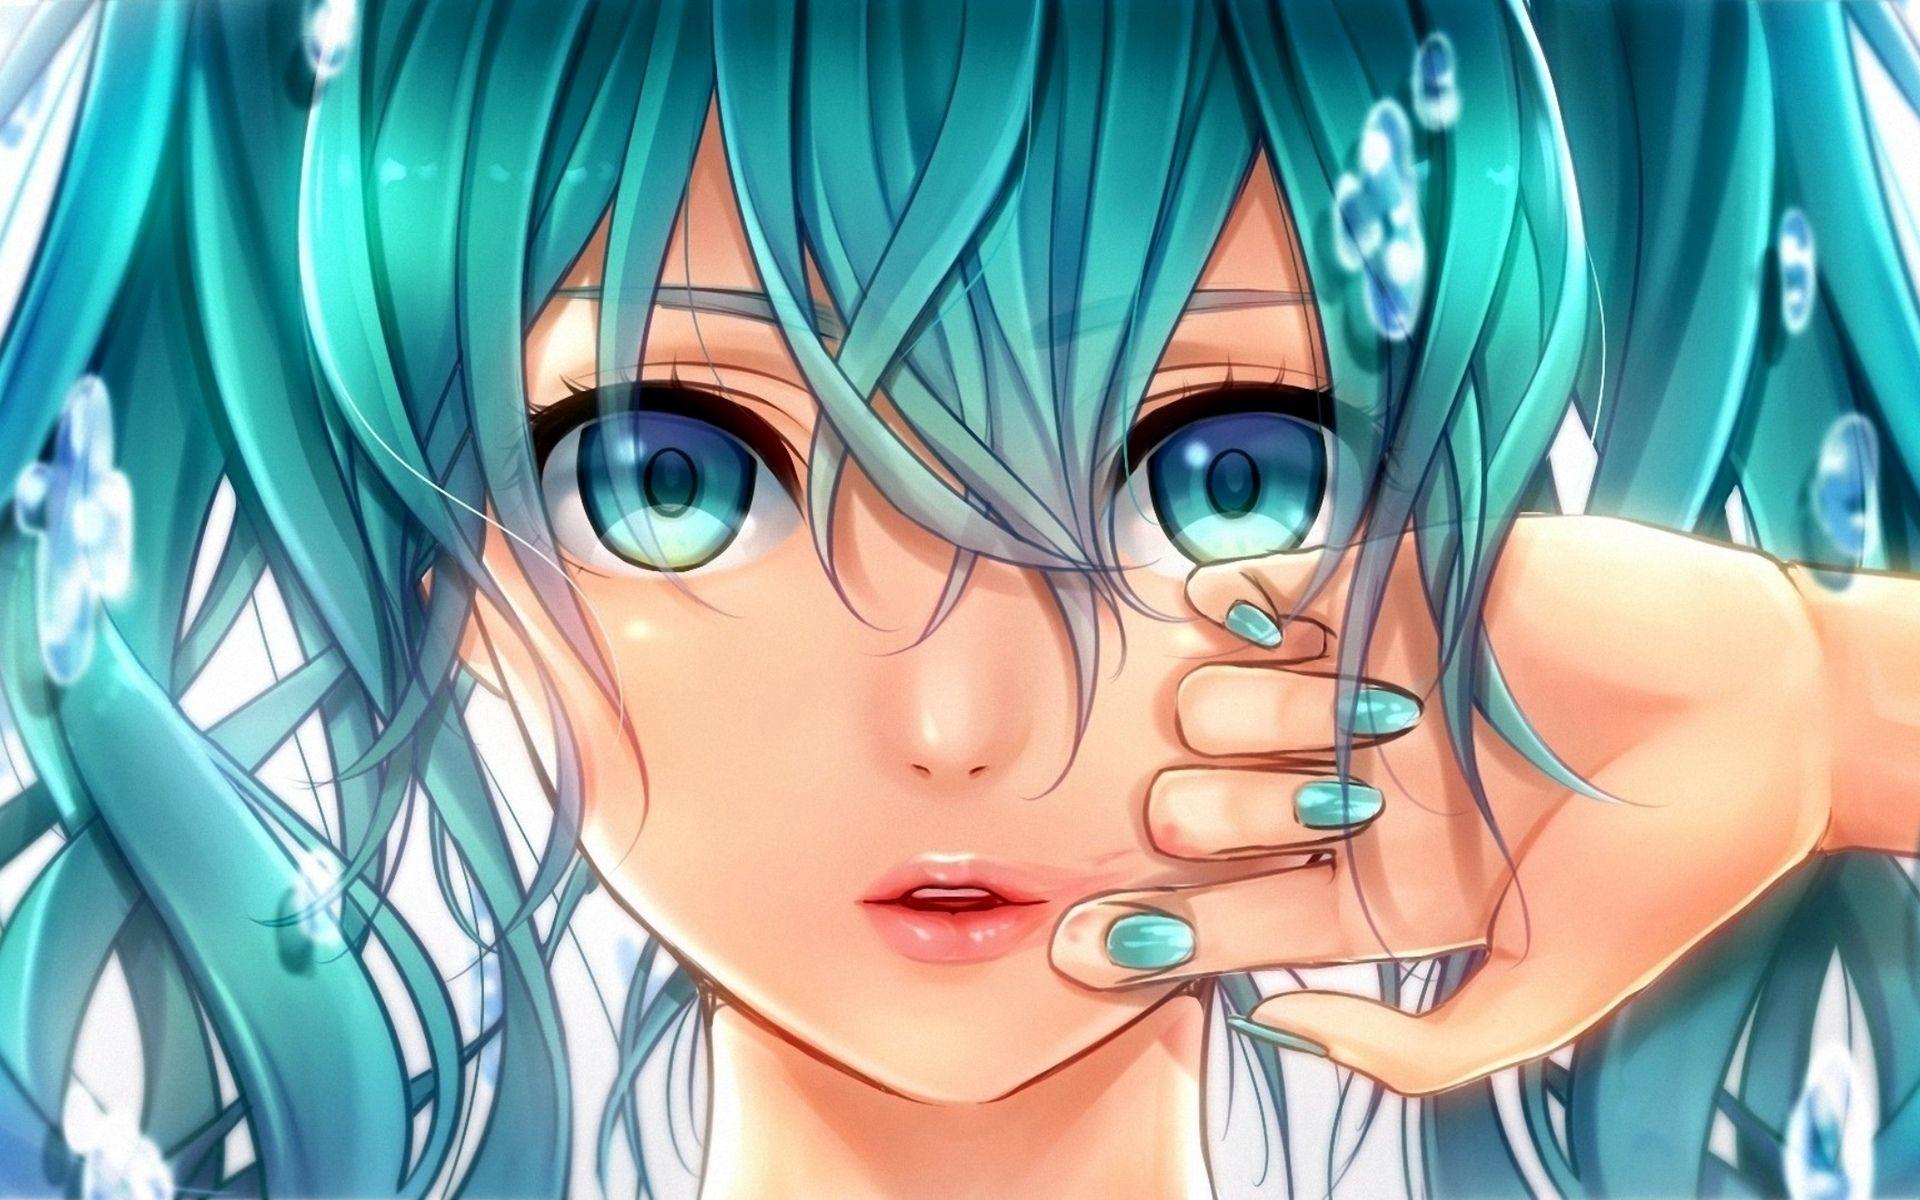 3. "Depressed anime girl with blue hair" - wide 1